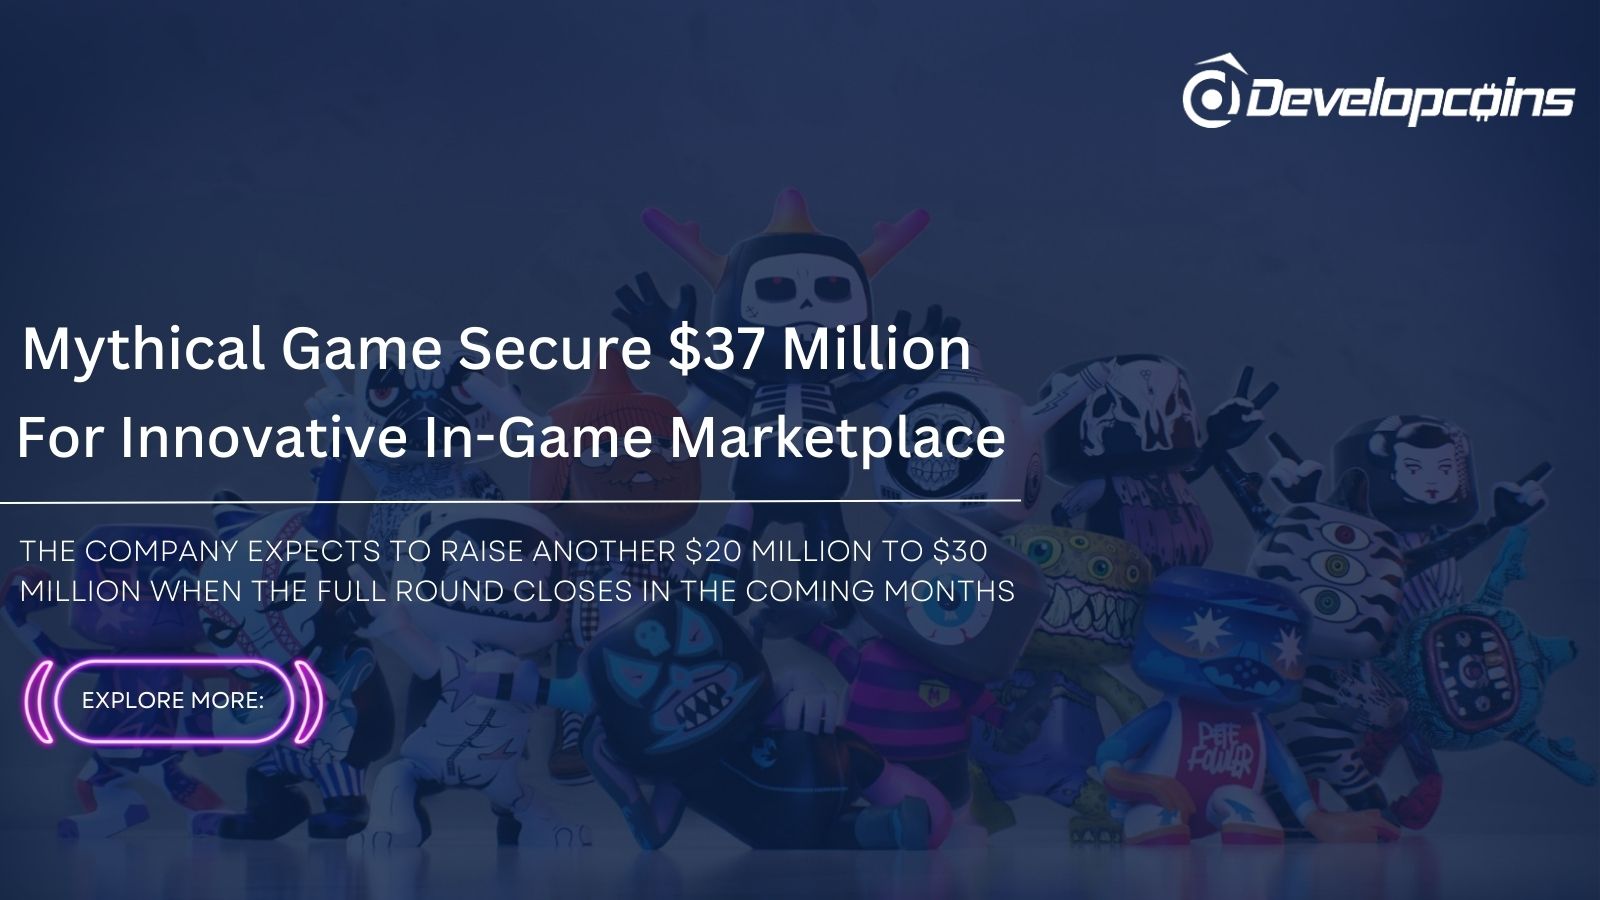 Mythical Games Secures $37 Million In Series C Funding For Innovative In-Game Marketplace